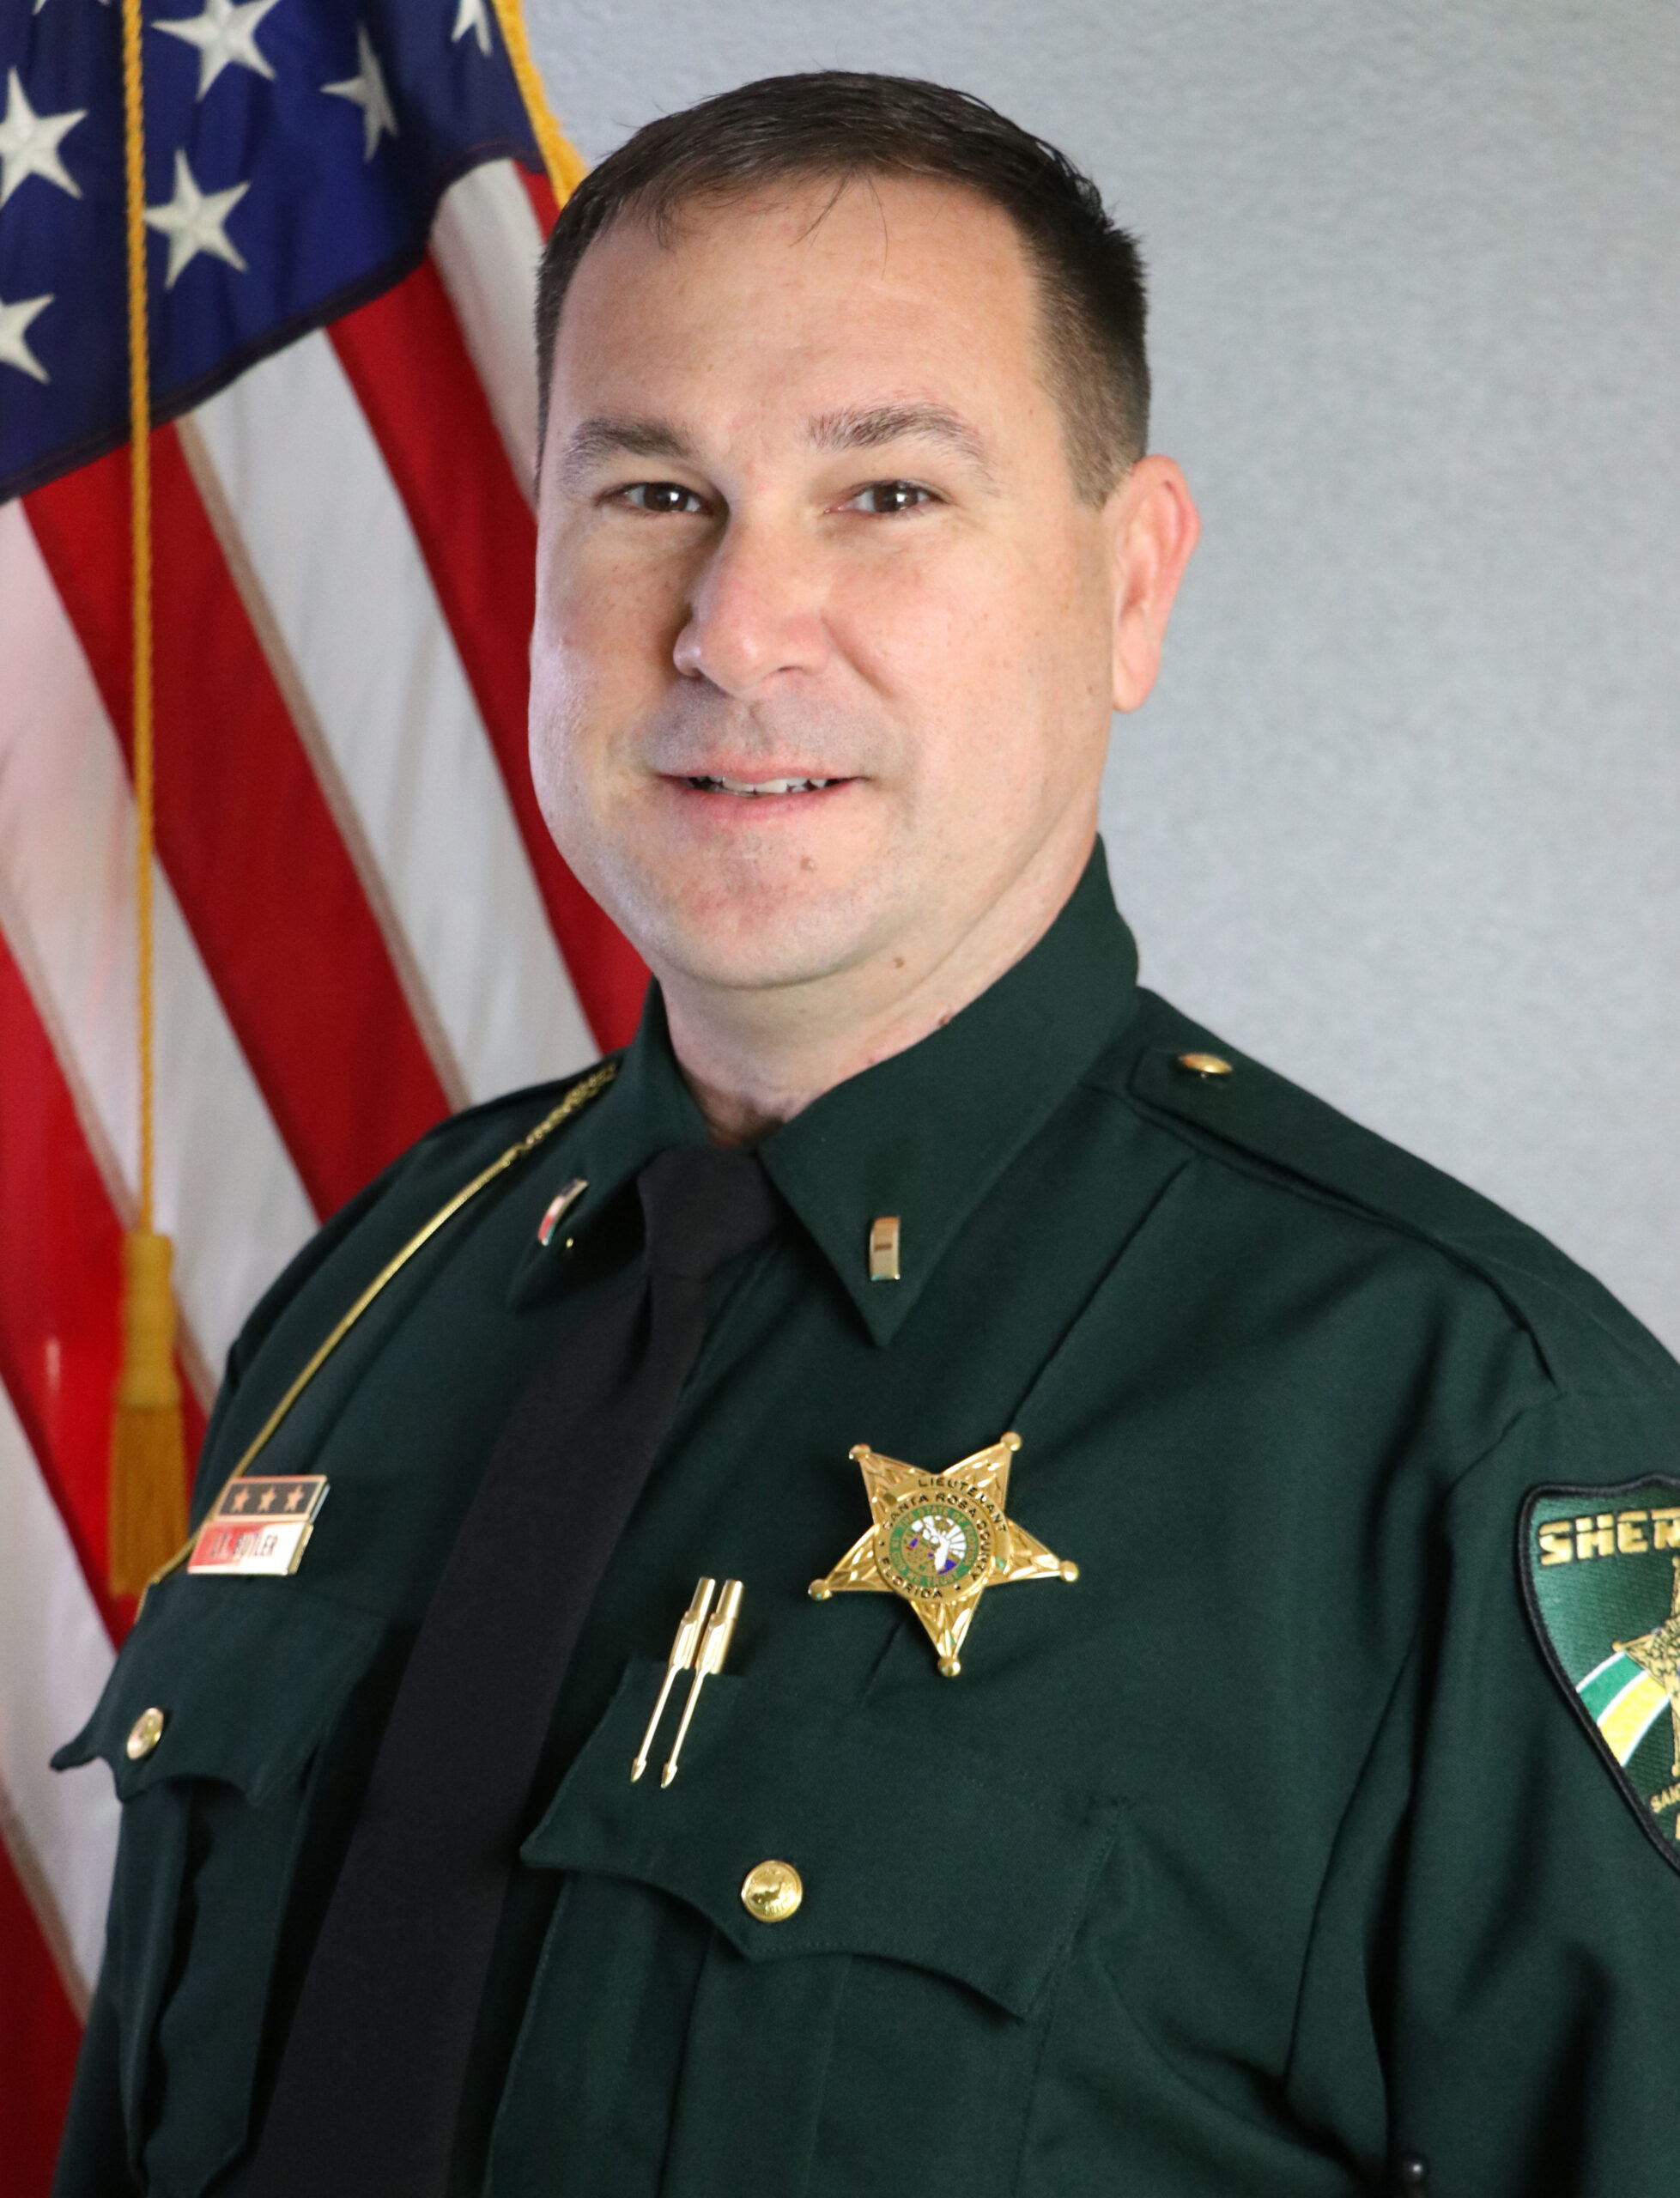 A portrait of a male sheriff in uniform with badges, standing in front of the american flag.